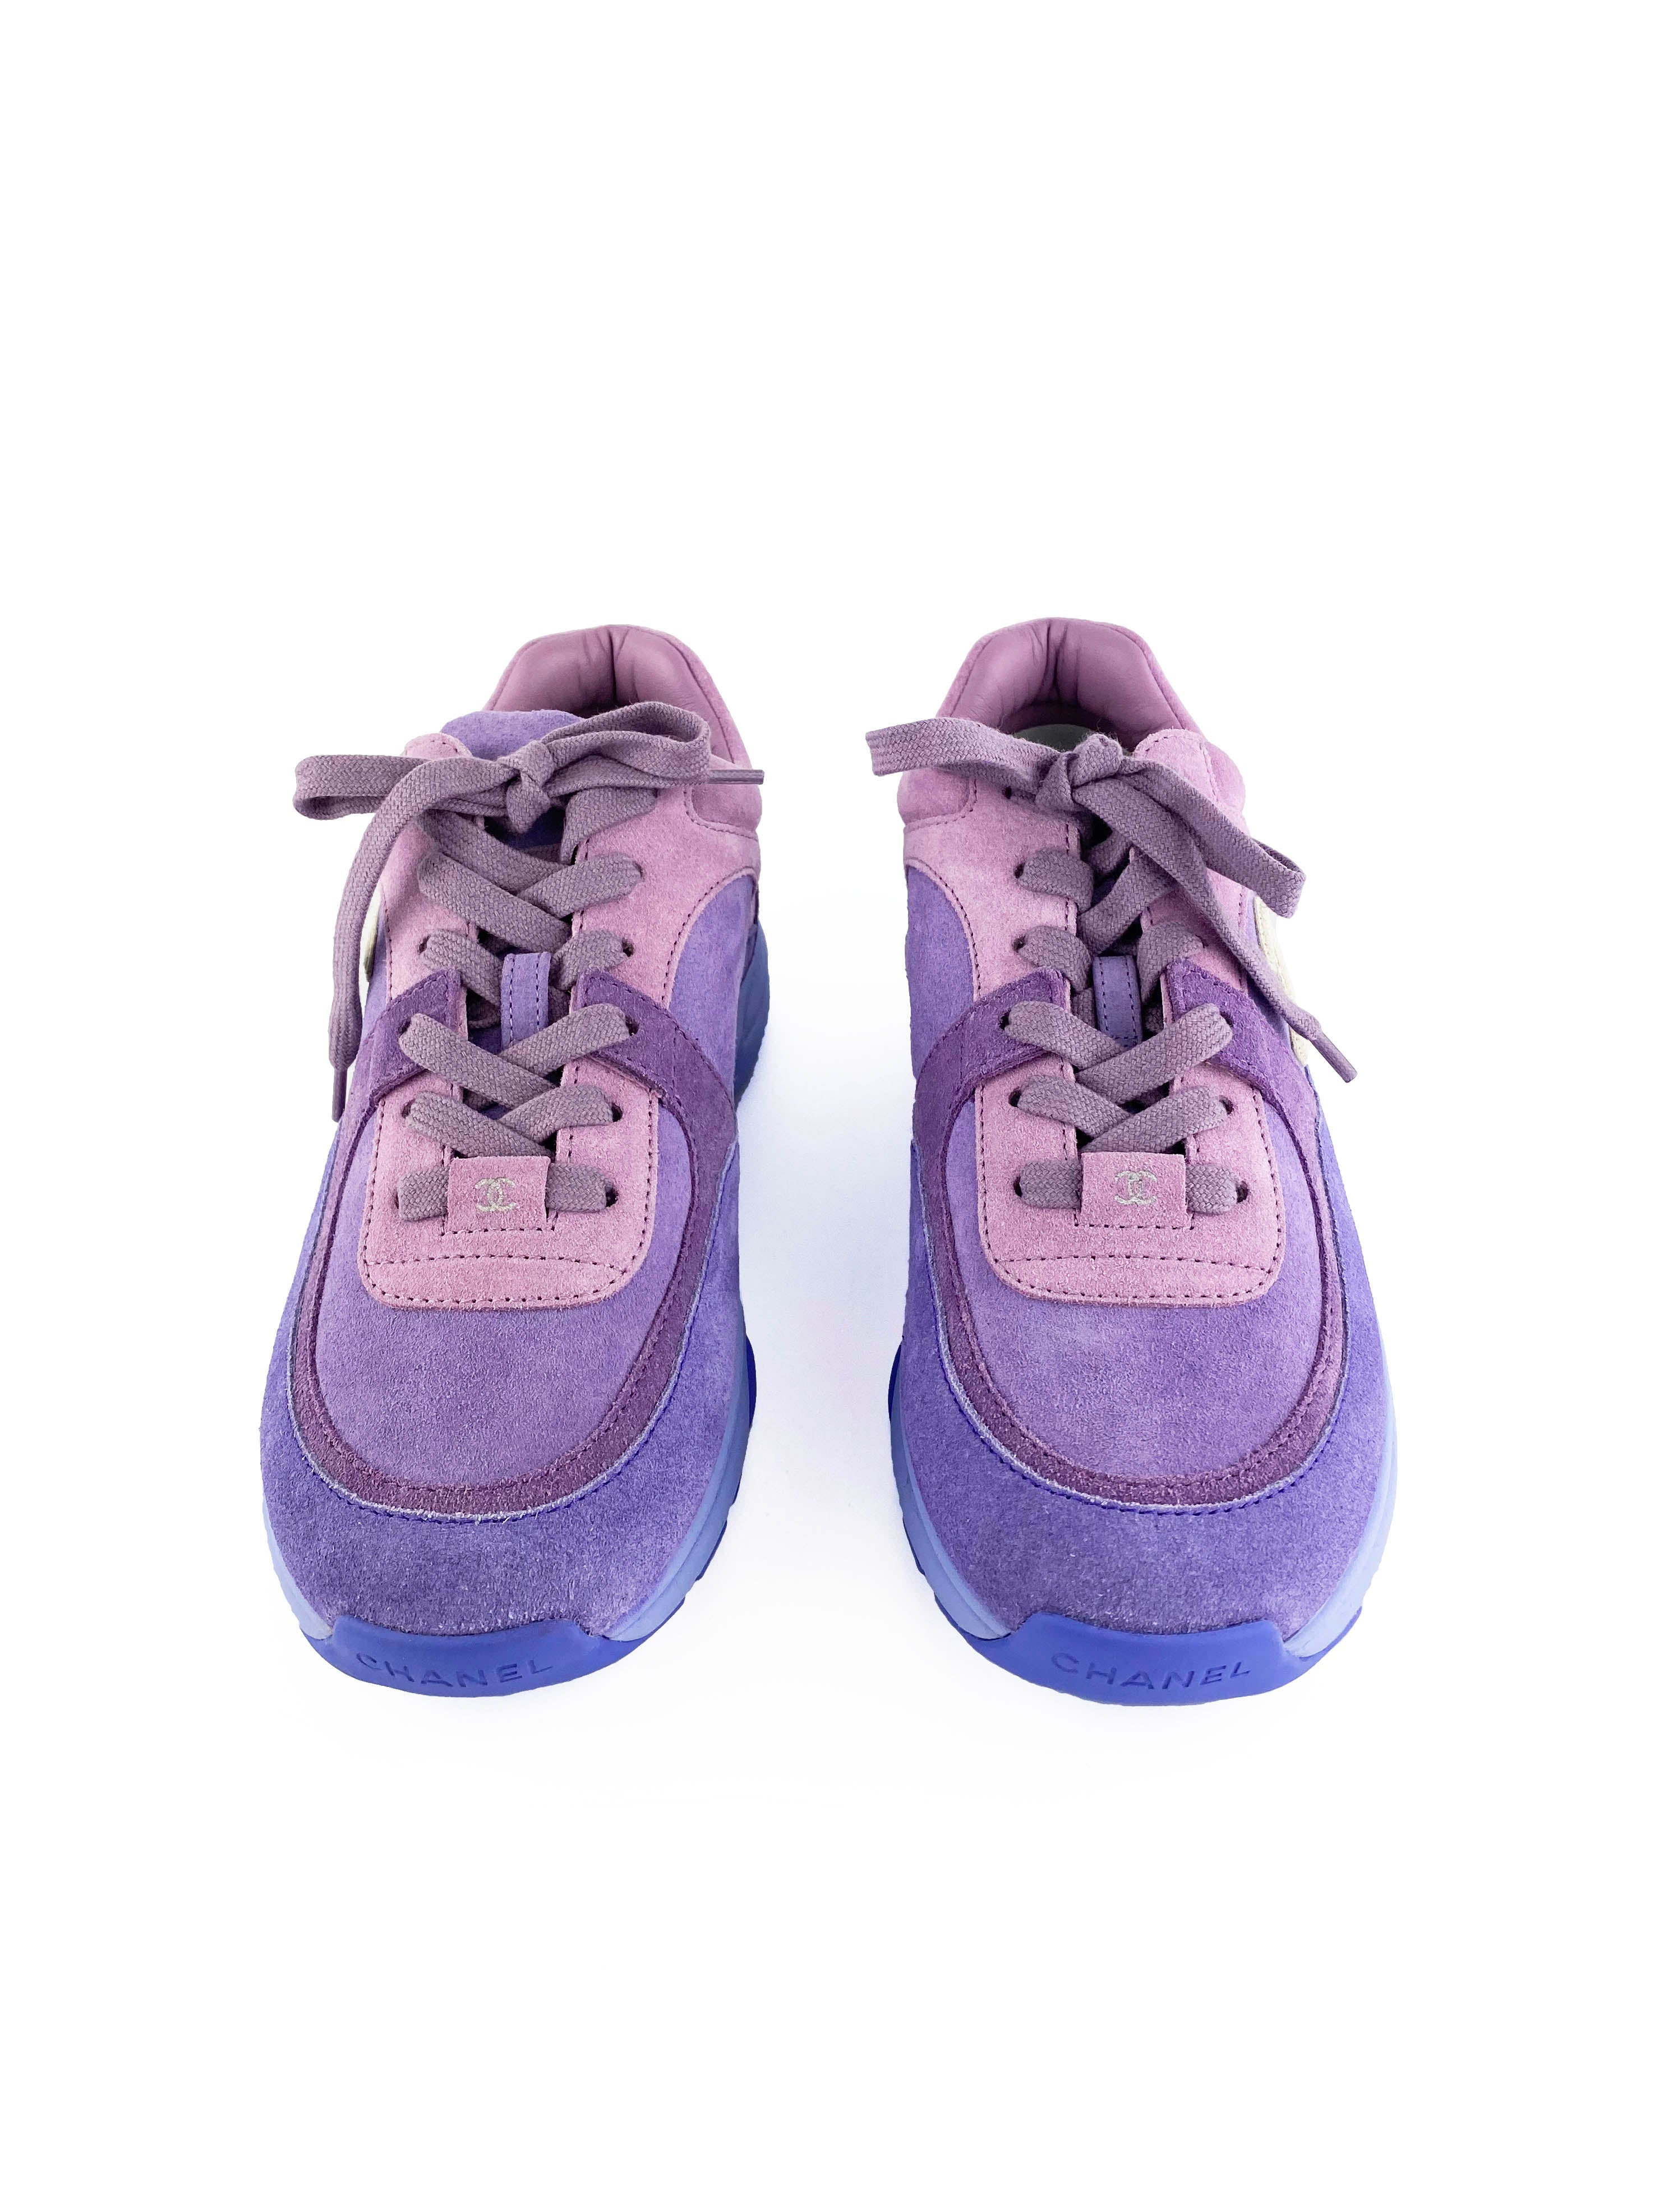 Chanel Purple Suede CC Sneakers 38